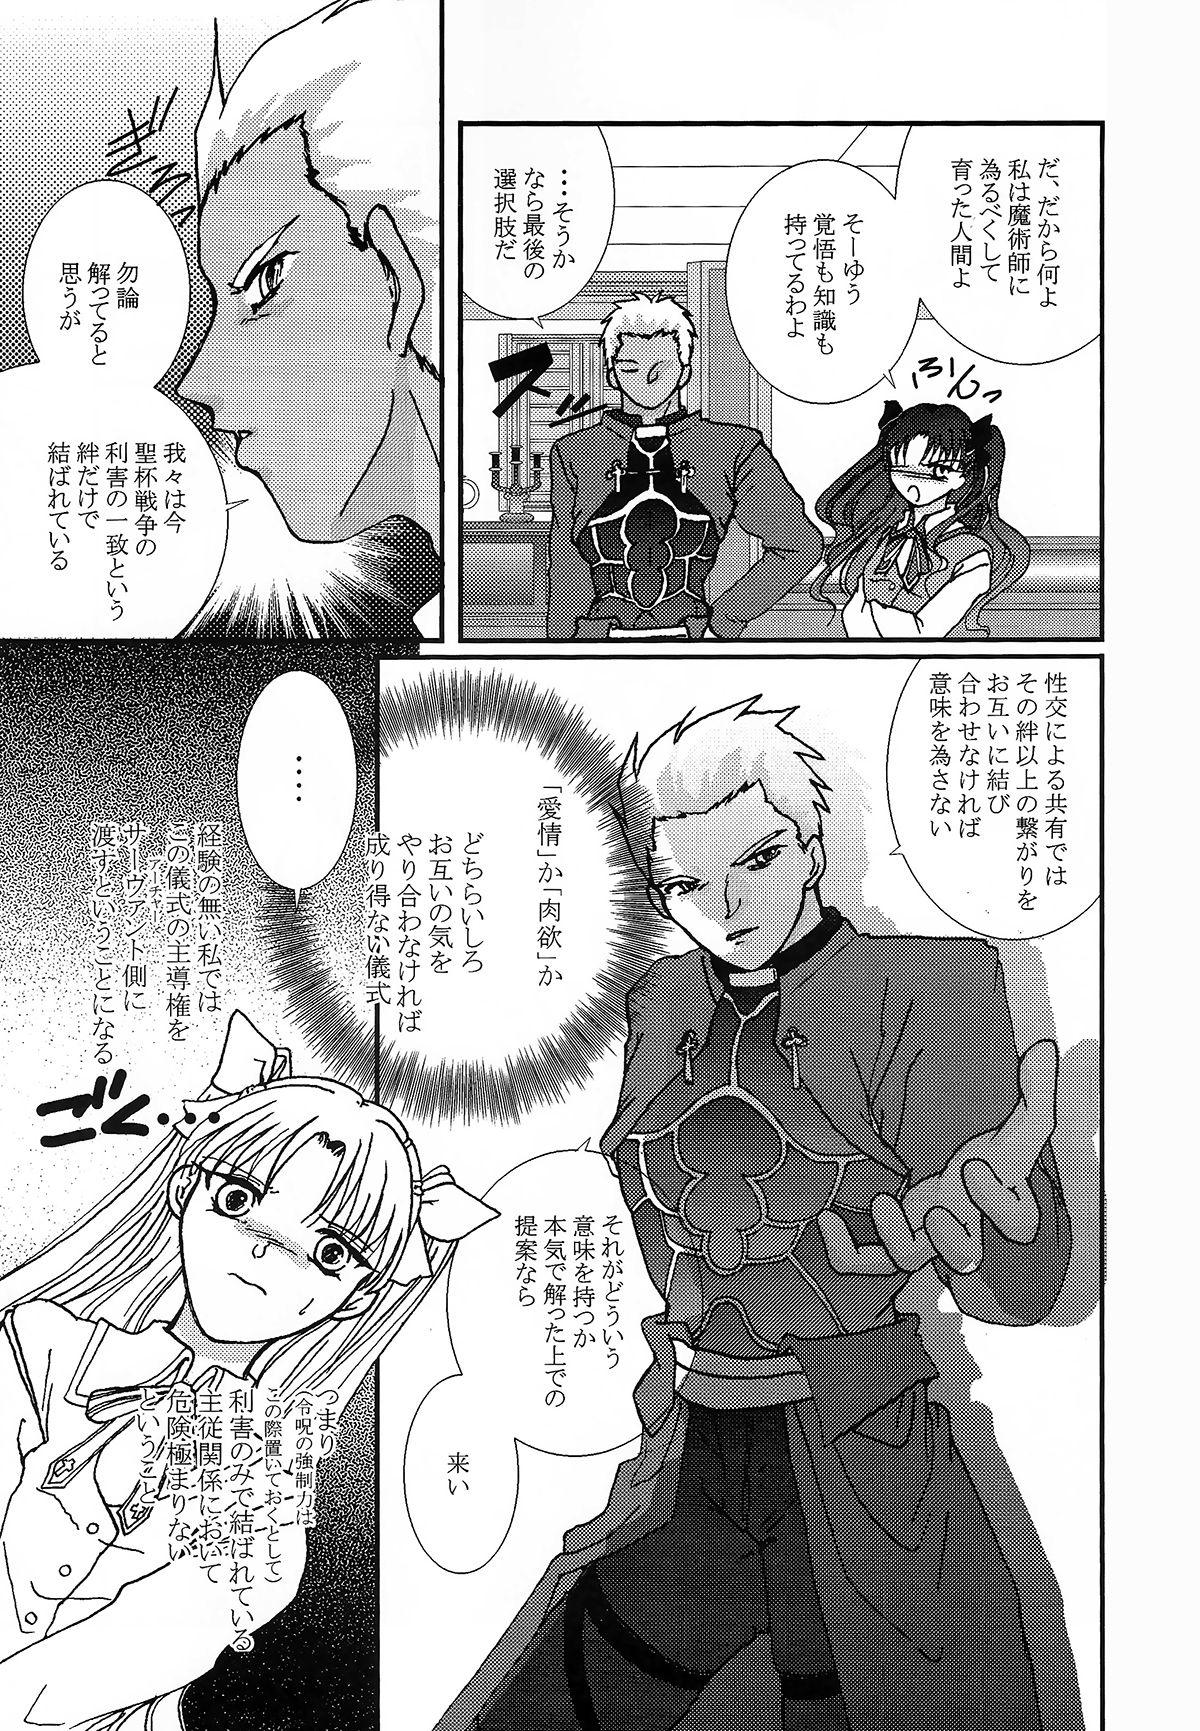 Masturbando Question-7 - Fate stay night Shaved - Page 9